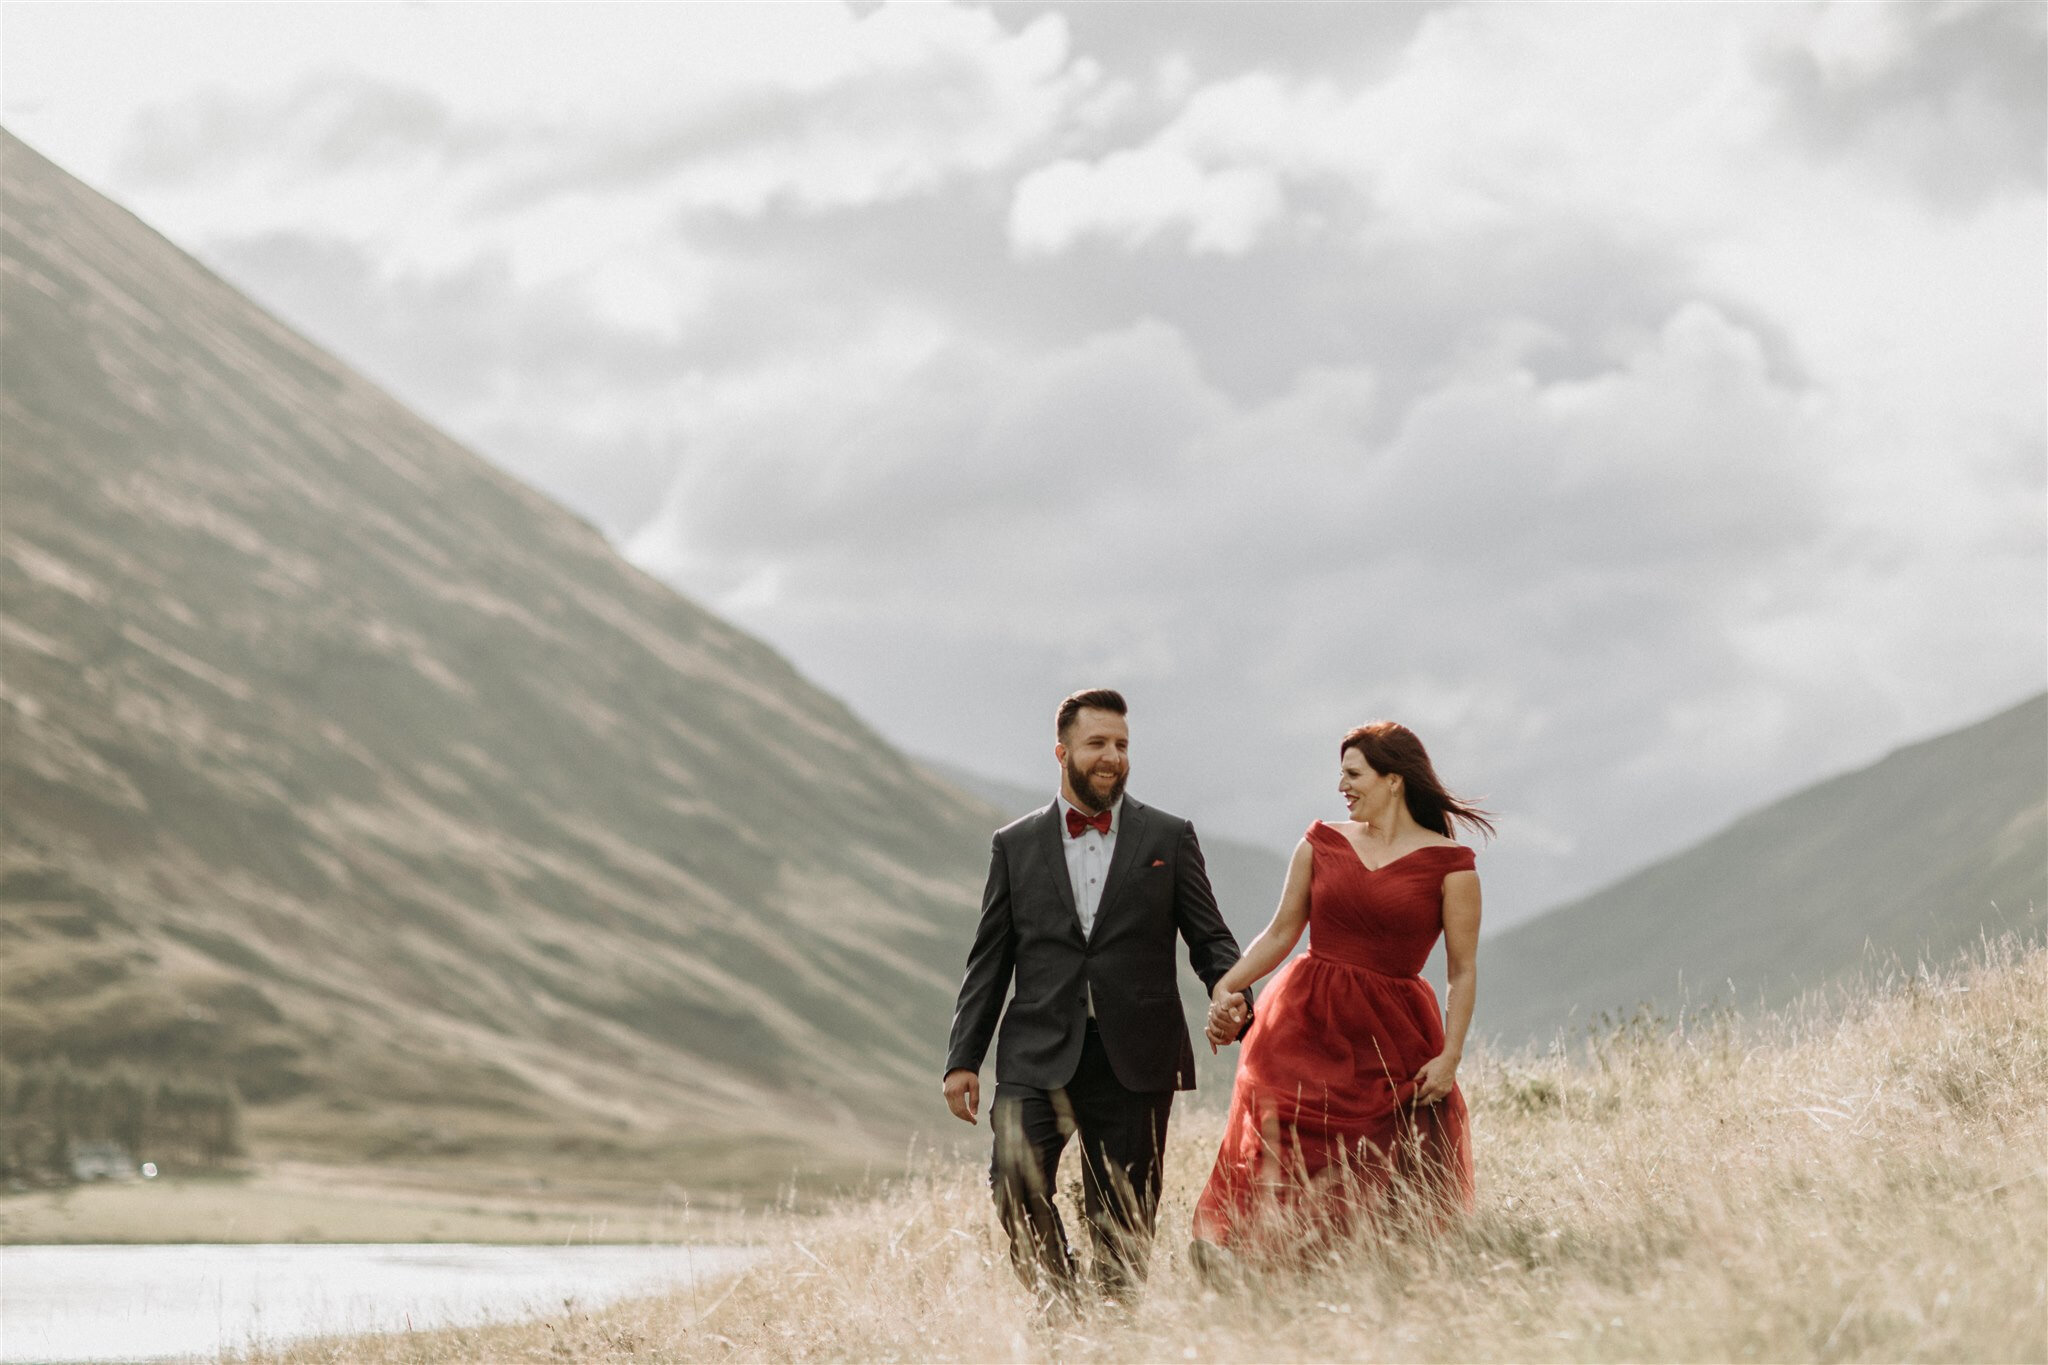  Glen Coe Scotland elopement adventure session. Bride in red dress and her groom walking hand in hand through a field in the Scottish Highlands | Adventure elopement photographer